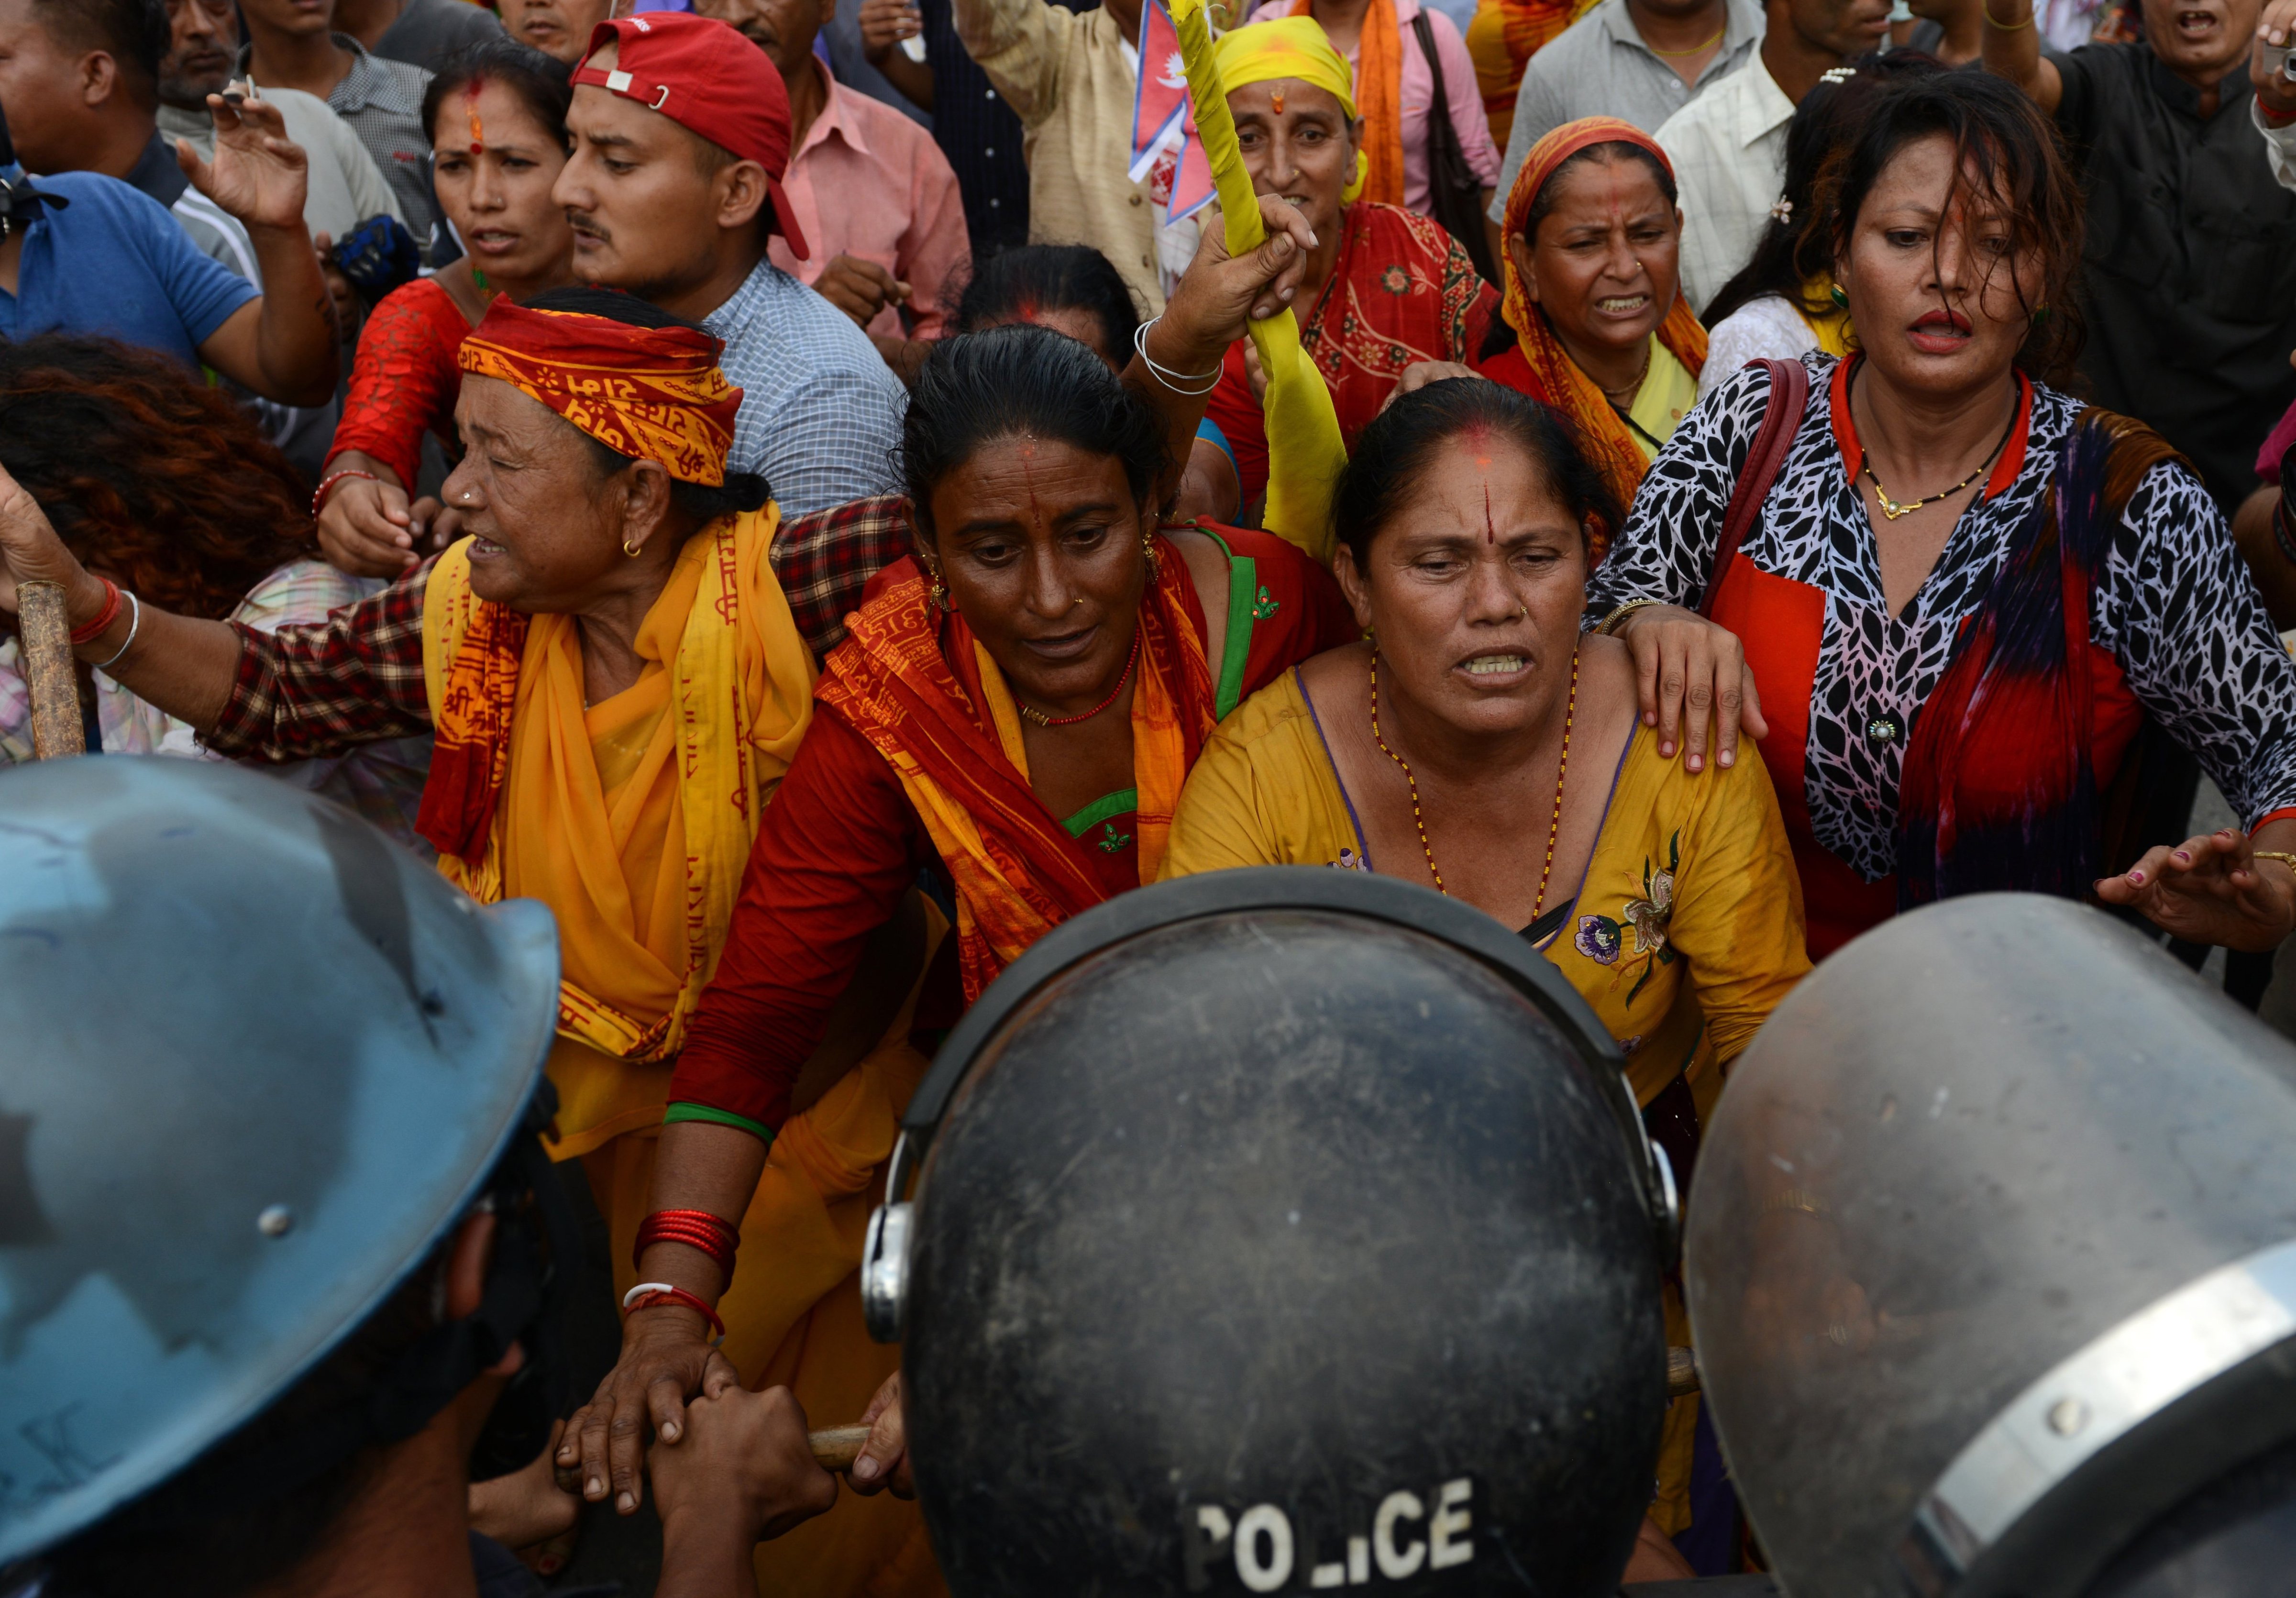 Nepalese police stop Hindu activists as they try to break through to a cordoned-off area near parliament during a protest demanding Nepal be declared a Hindu state in Kathmandu on September 1, 2015.